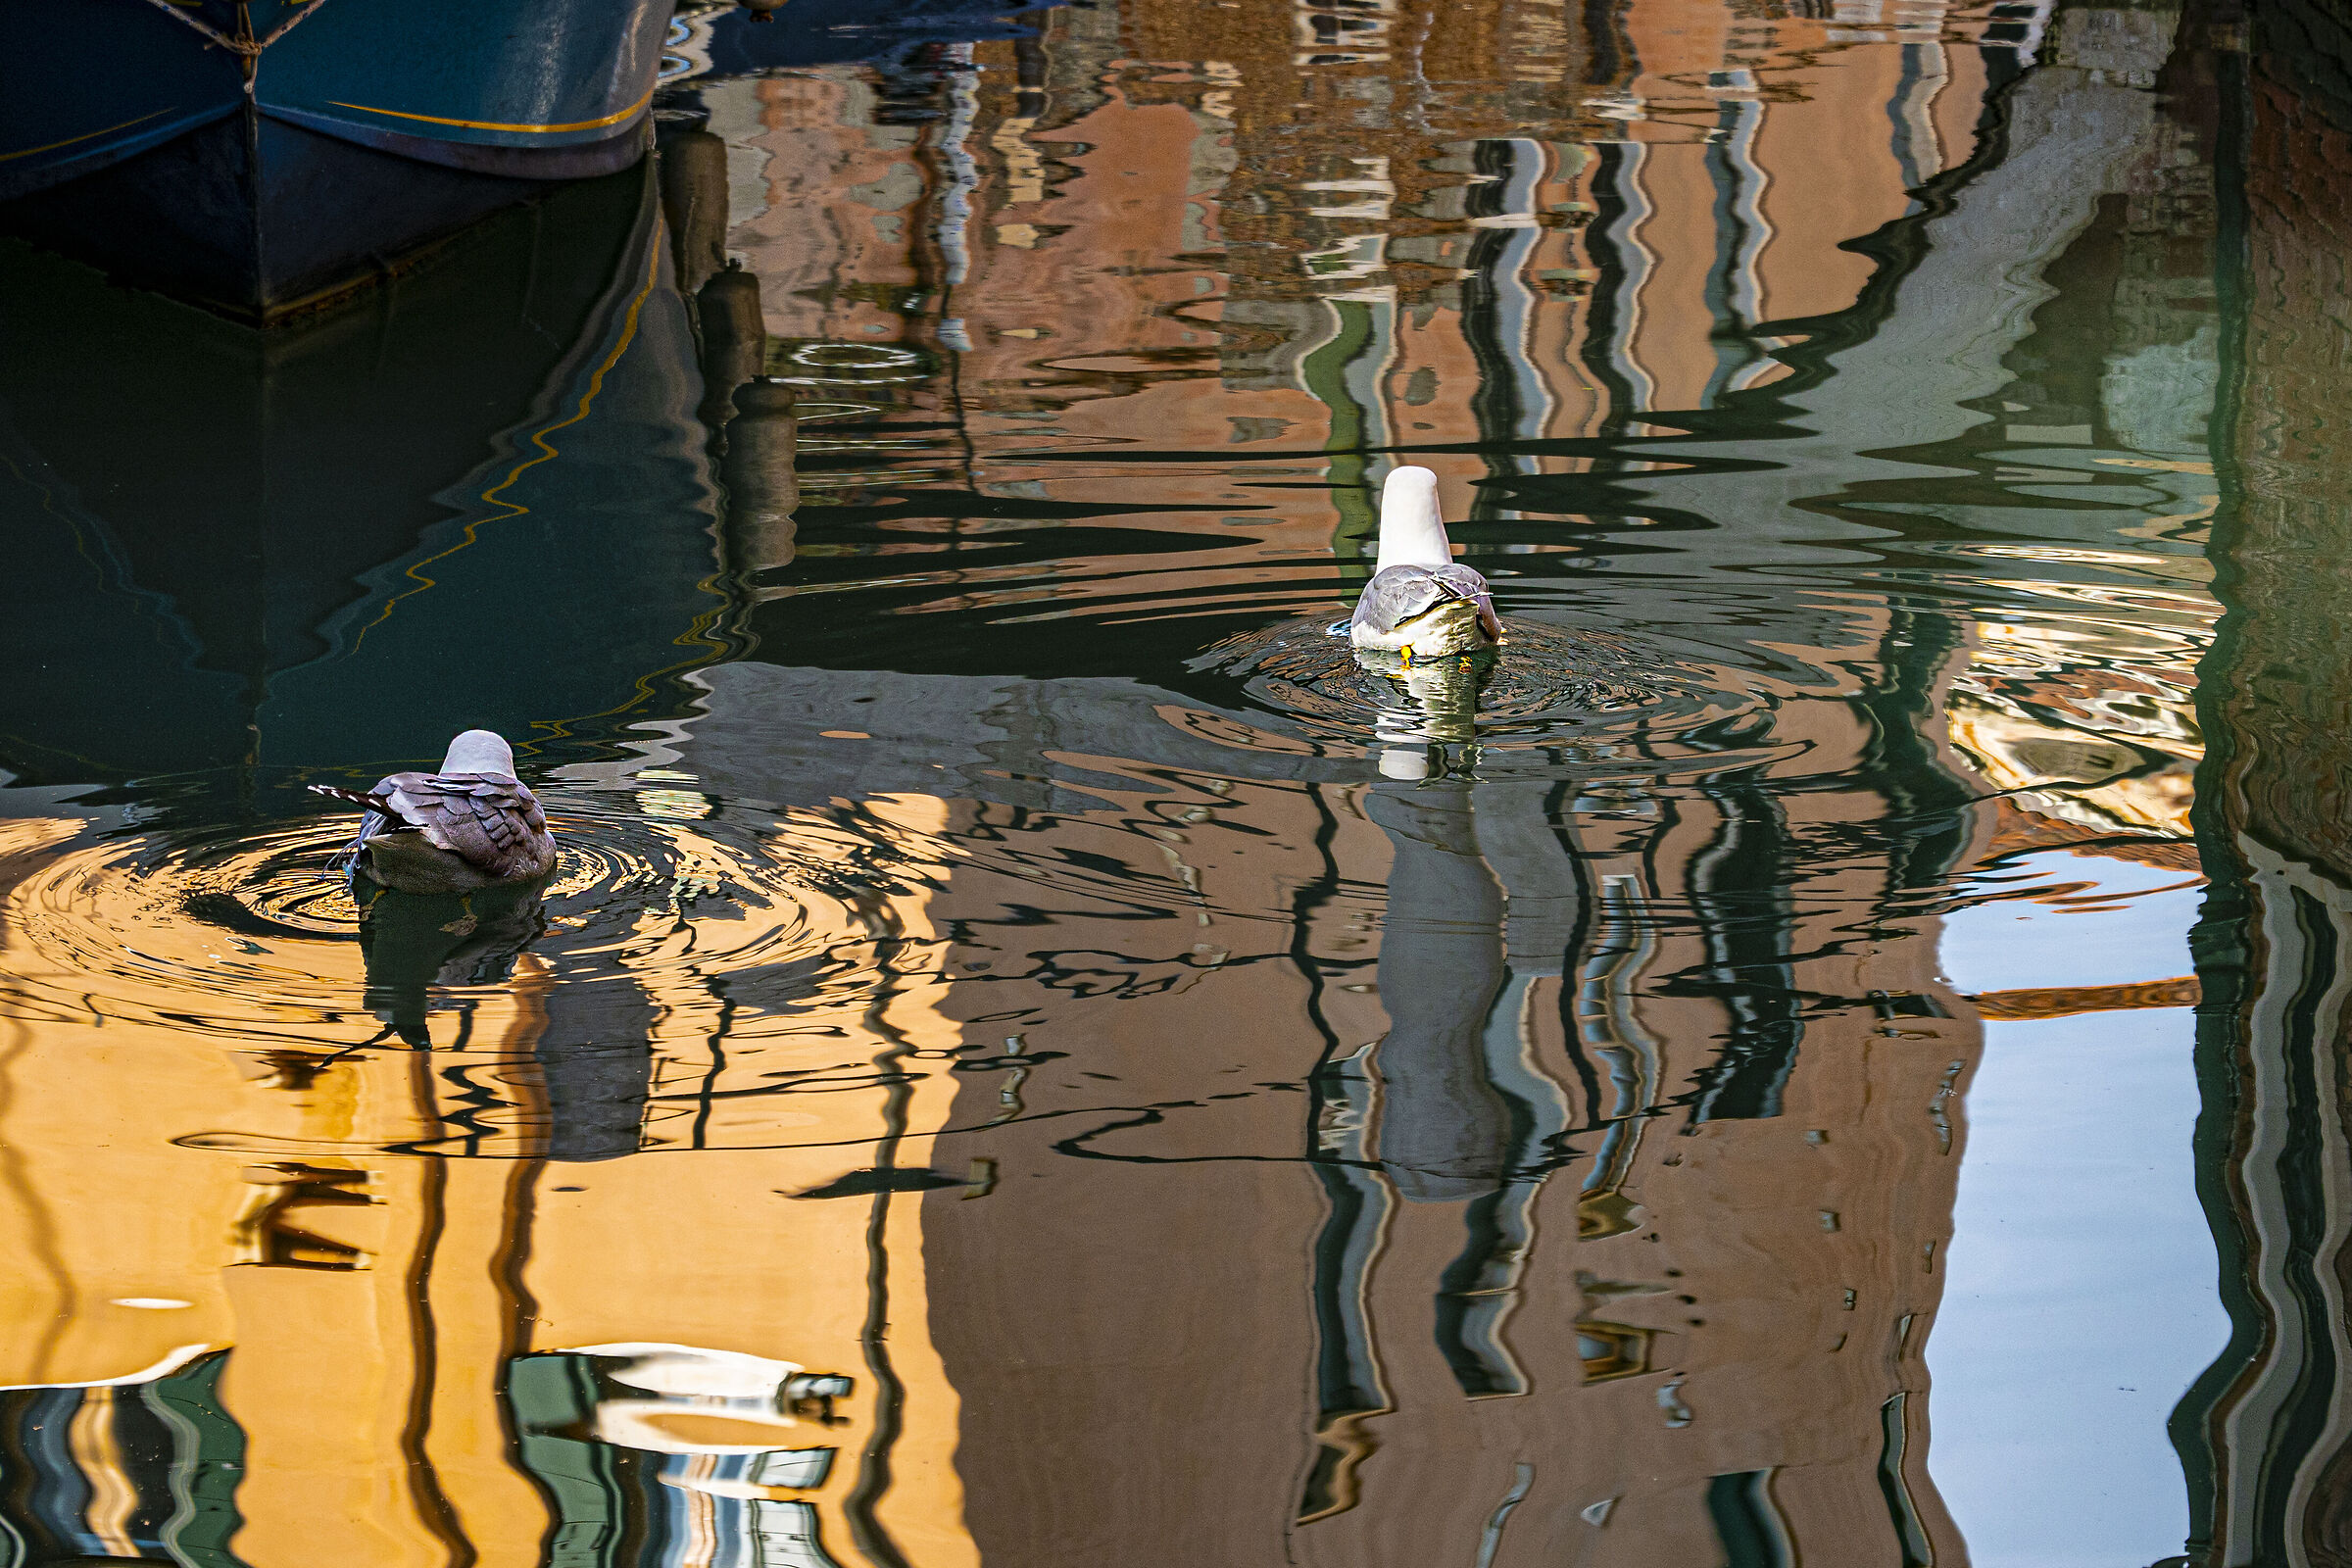 Reflections and seagulls in Venice...